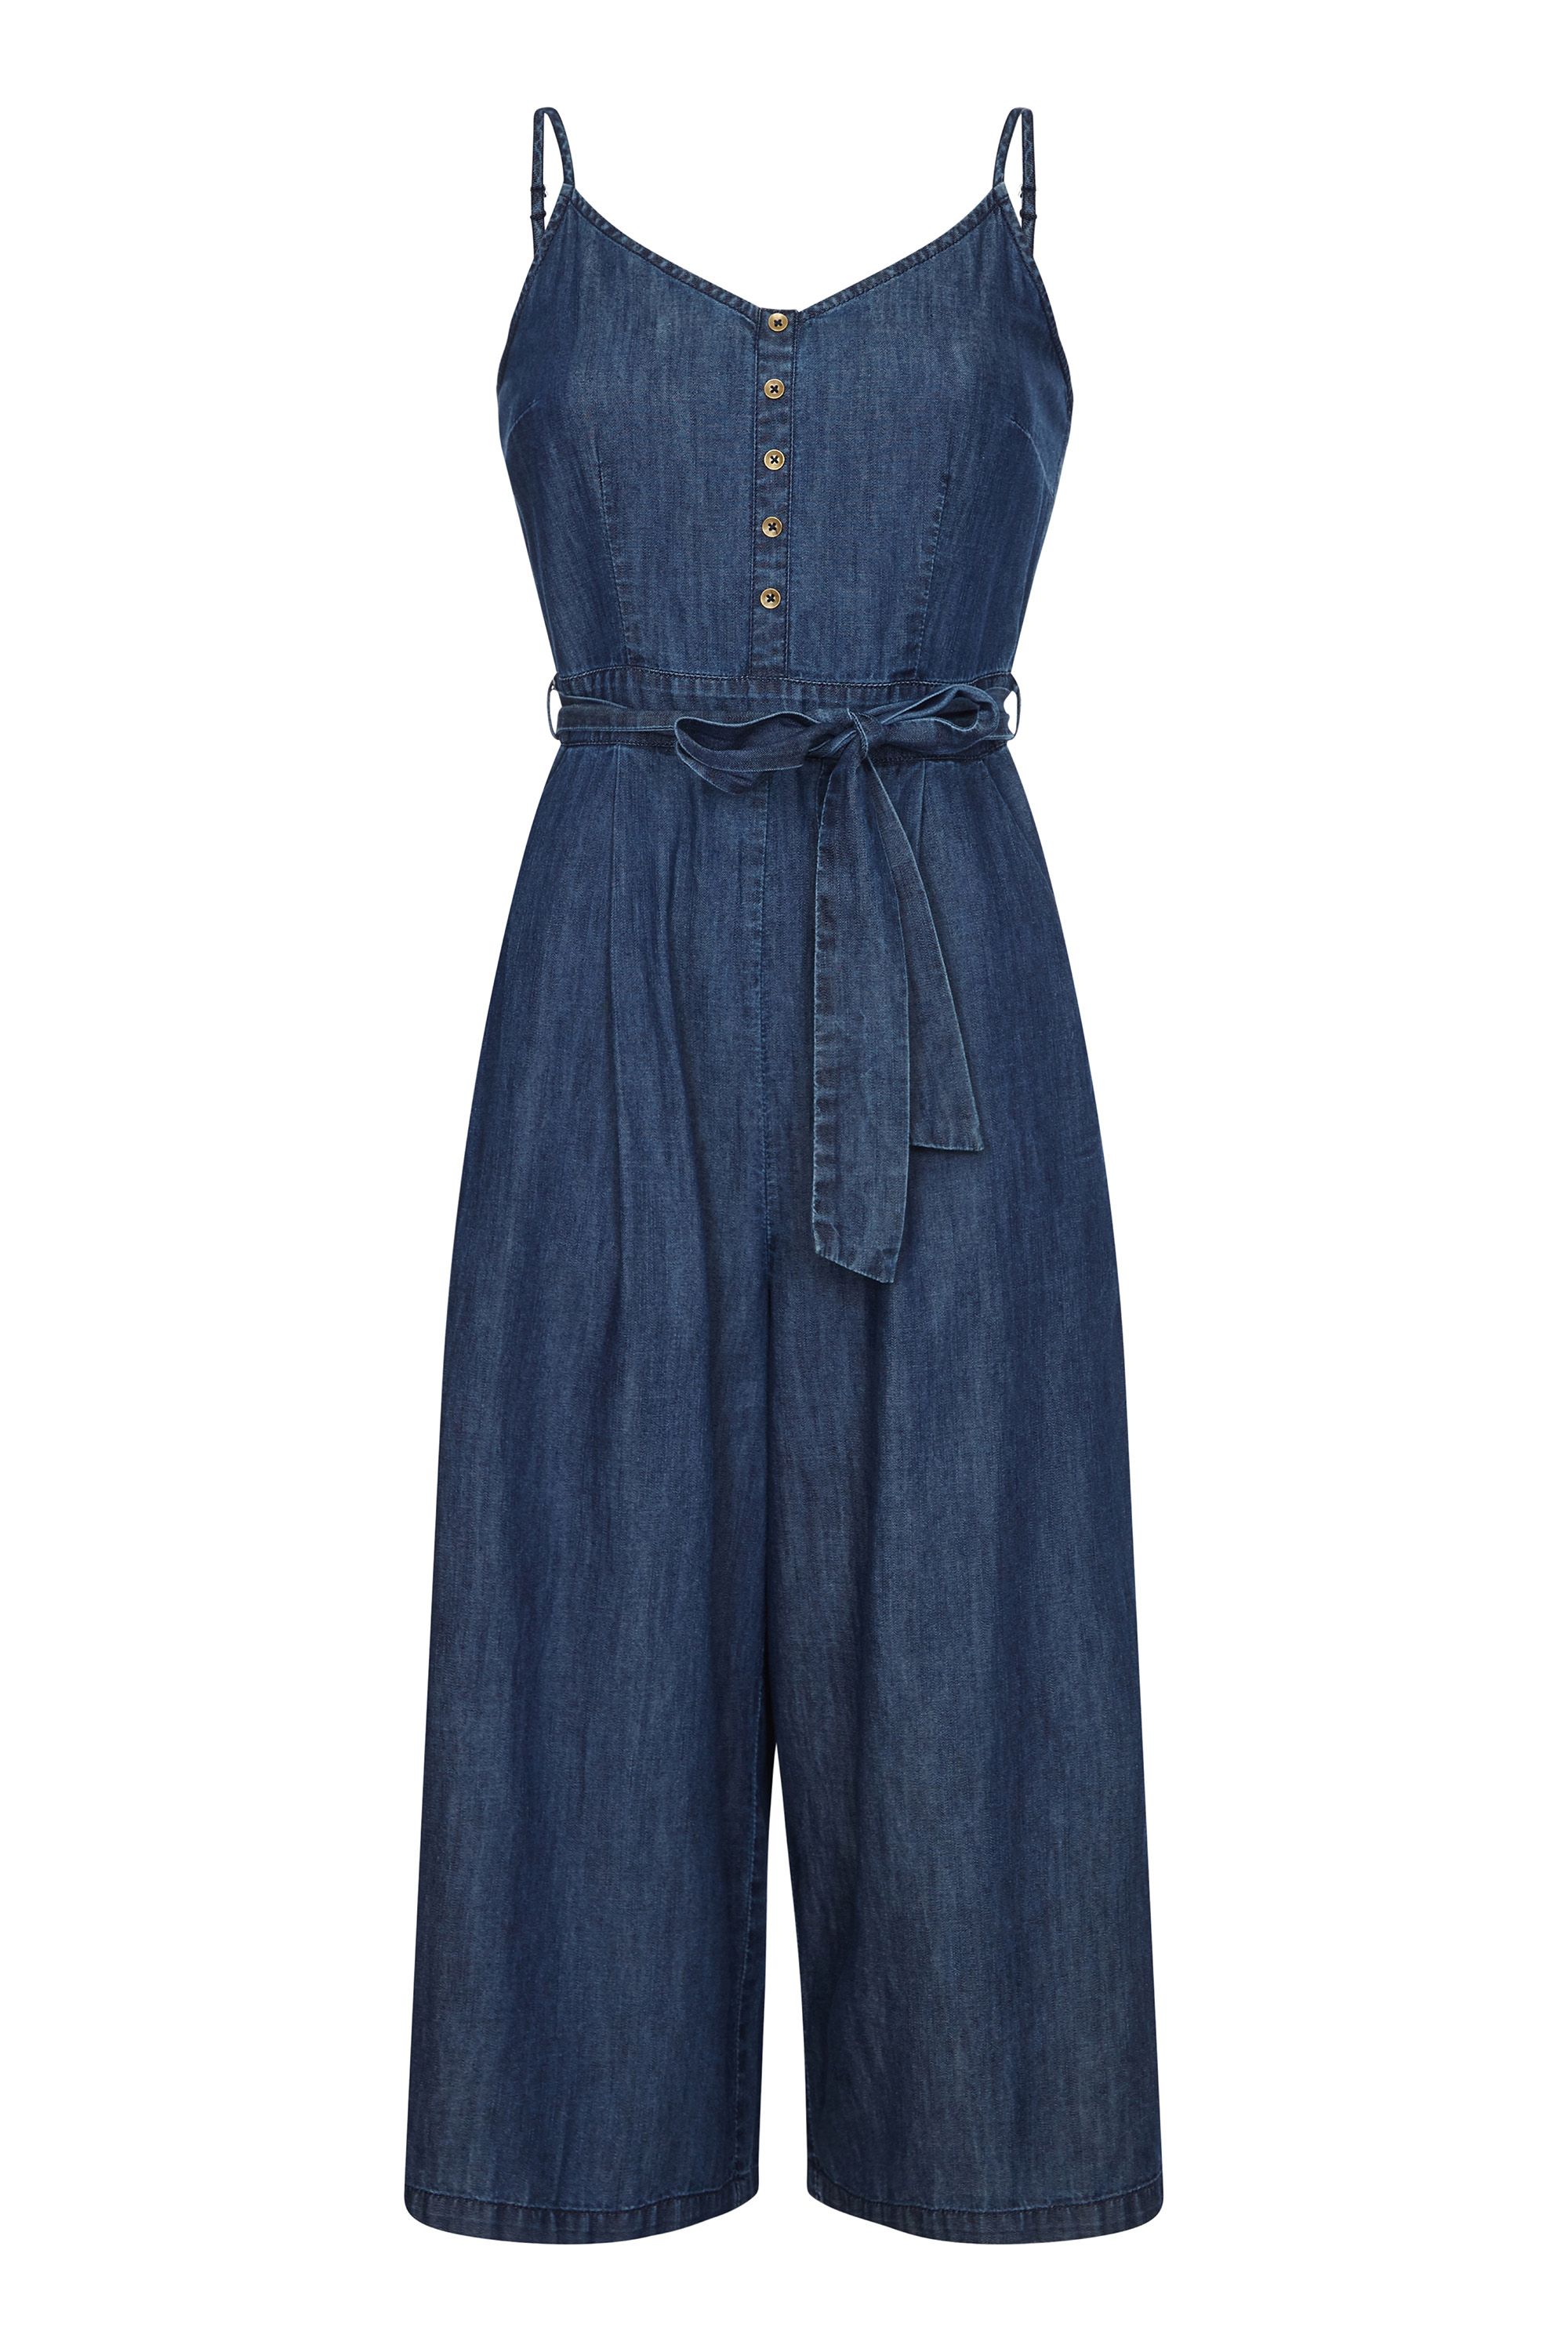 Do denim differently this season and opt for this Denim Jumpsuit With Button Detail. Falling on the knee, this casual jumpsuit features a sleeveless design and button detailing. The self-tie waist cinches your shape, while soft denim material is comfortable and figure flattering. Be bold this summer, partner this jumpsuit with statement heels and matching jewellery. 100% Cotton. Machine Wash At 30. Length is 110cm/43inches. Lilly is 5ft 9in, 180cm and wears size 10.